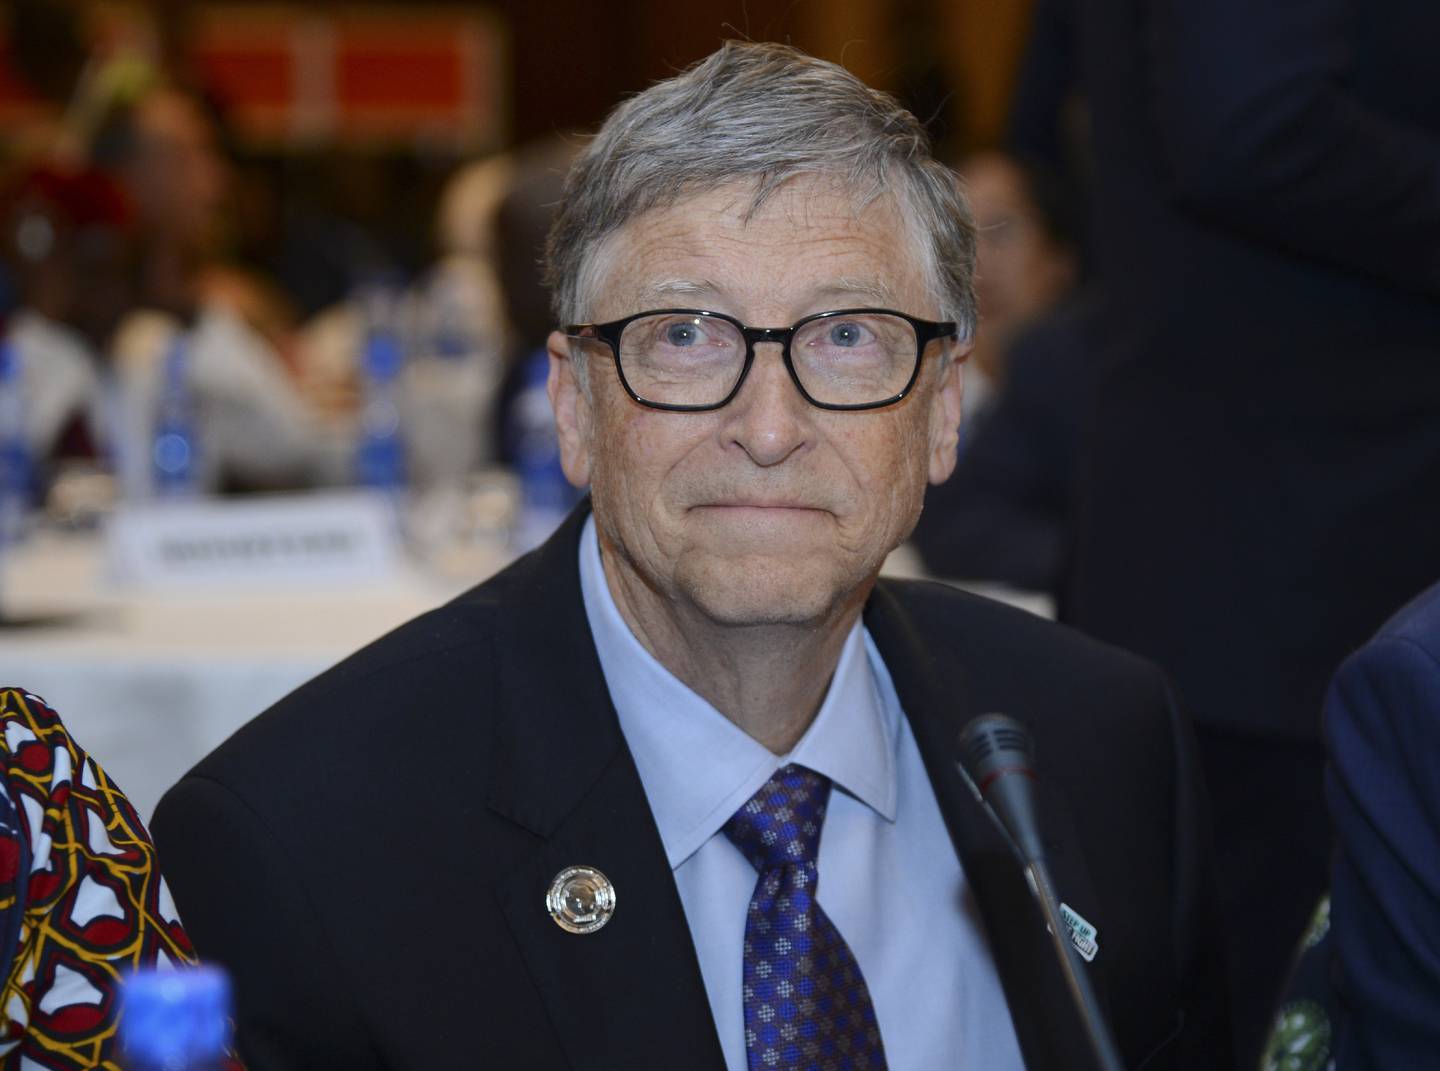 FILE - In this Feb. 9, 2019, file photo, Bill Gates, chairman of the Bill & Melinda Gates Foundation, attends the "Africa Leadership Meeting - Investing in Health Outcomes" held at a hotel in Addis Ababa, Ethiopia. Leaders of the Gates and Rockefeller Foundations  grant makers that have committed billions of dollars to fight the coronavirus  are warning that without larger government and philanthropic investments in the manufacture and delivery of vaccines to people in poor nations, the pandemic could set back global progress on education, public health, and gender equality for years. (AP Photo/Samuel Habtab, File)